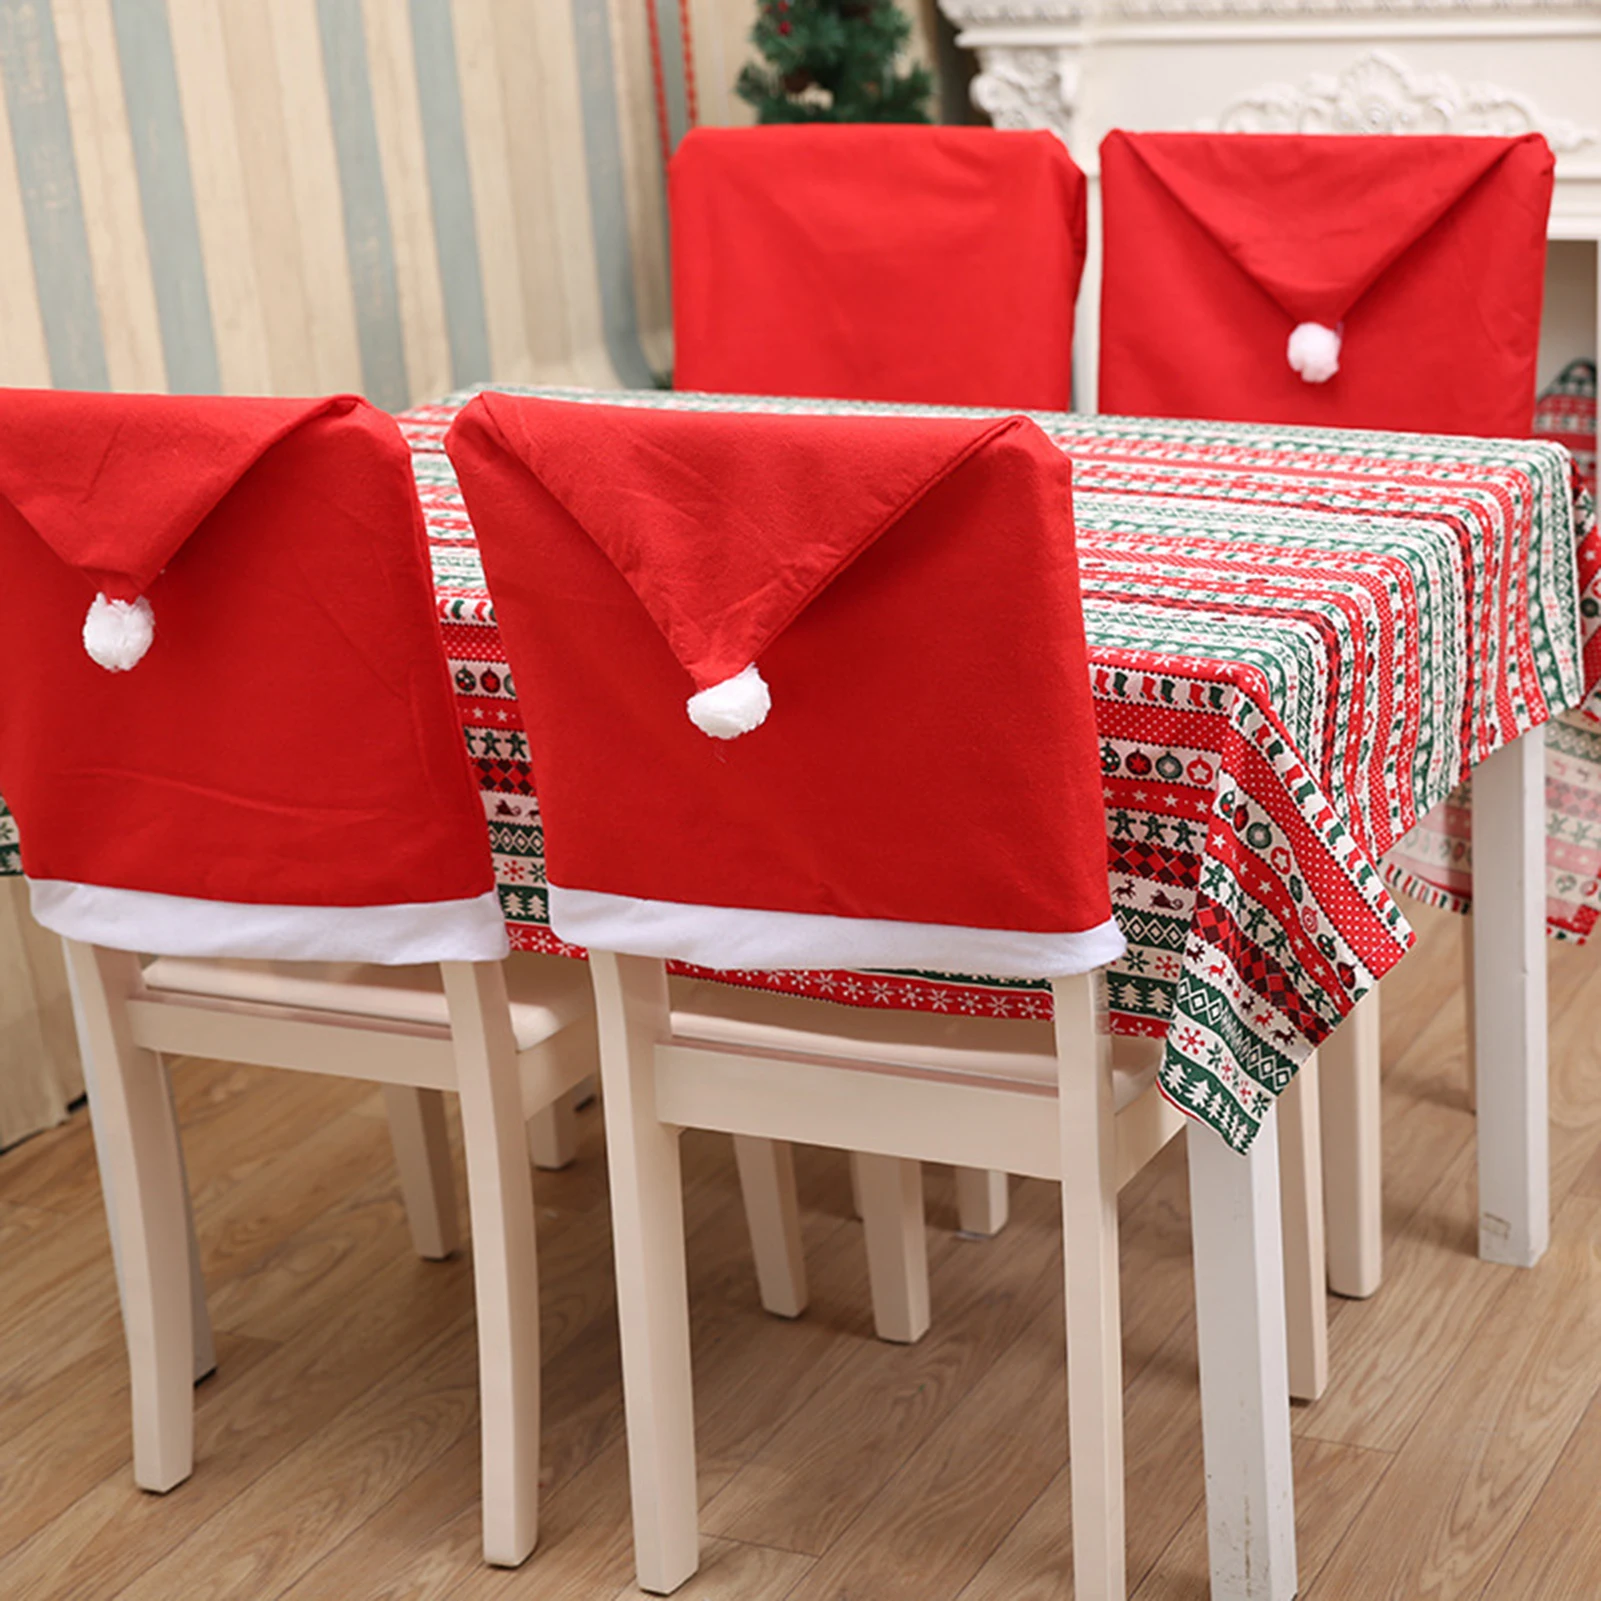 

6Pcs Red Santa Hat Slipcovers Santa Claus Hat Chair Covers for Christmas Restaurant Holiday Festival Party Decorations